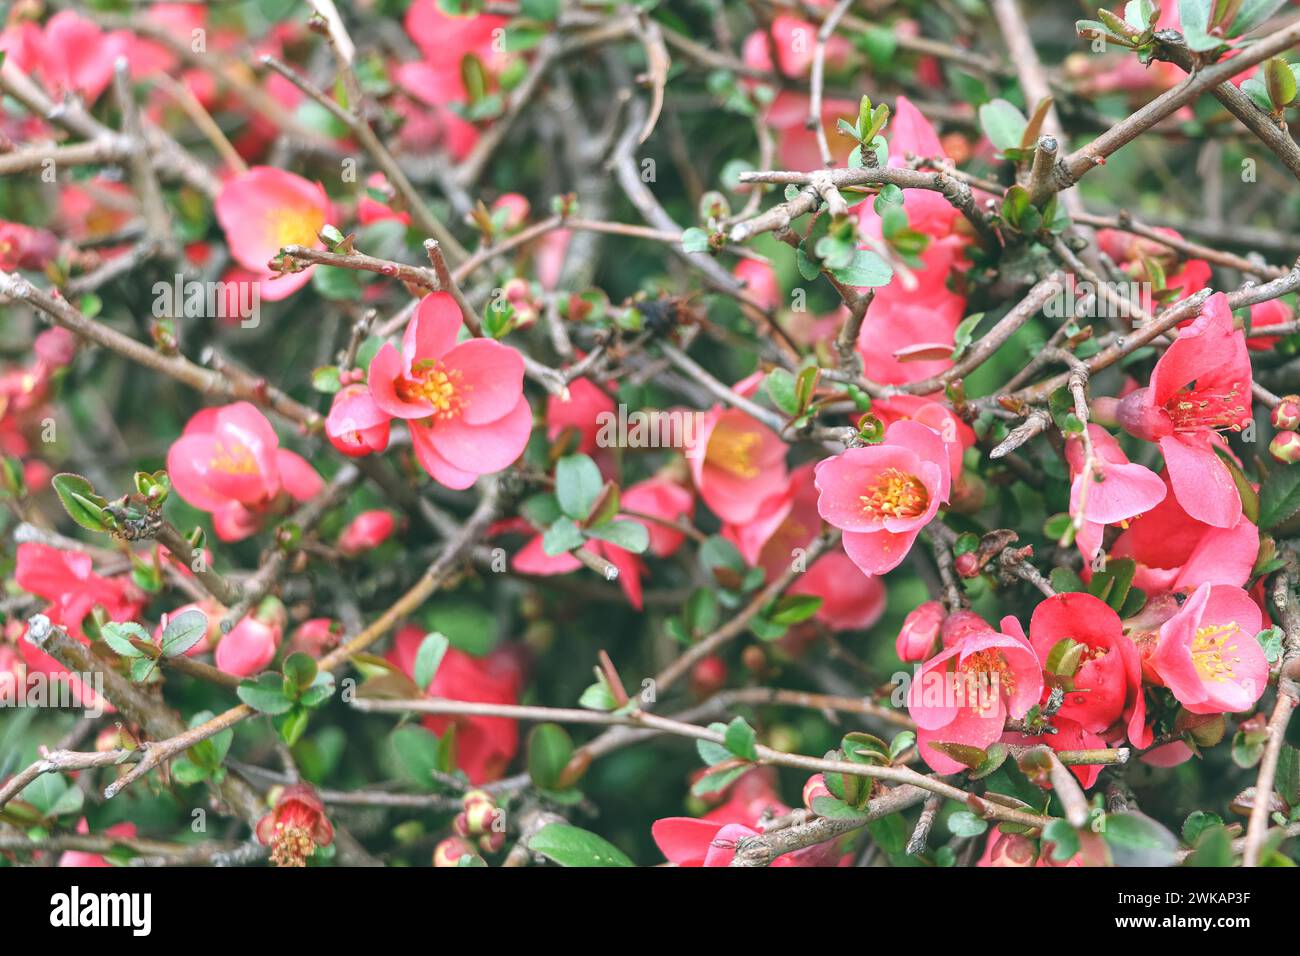 Blossom of spring pink flowers. Asian pink flowers. Stock Photo